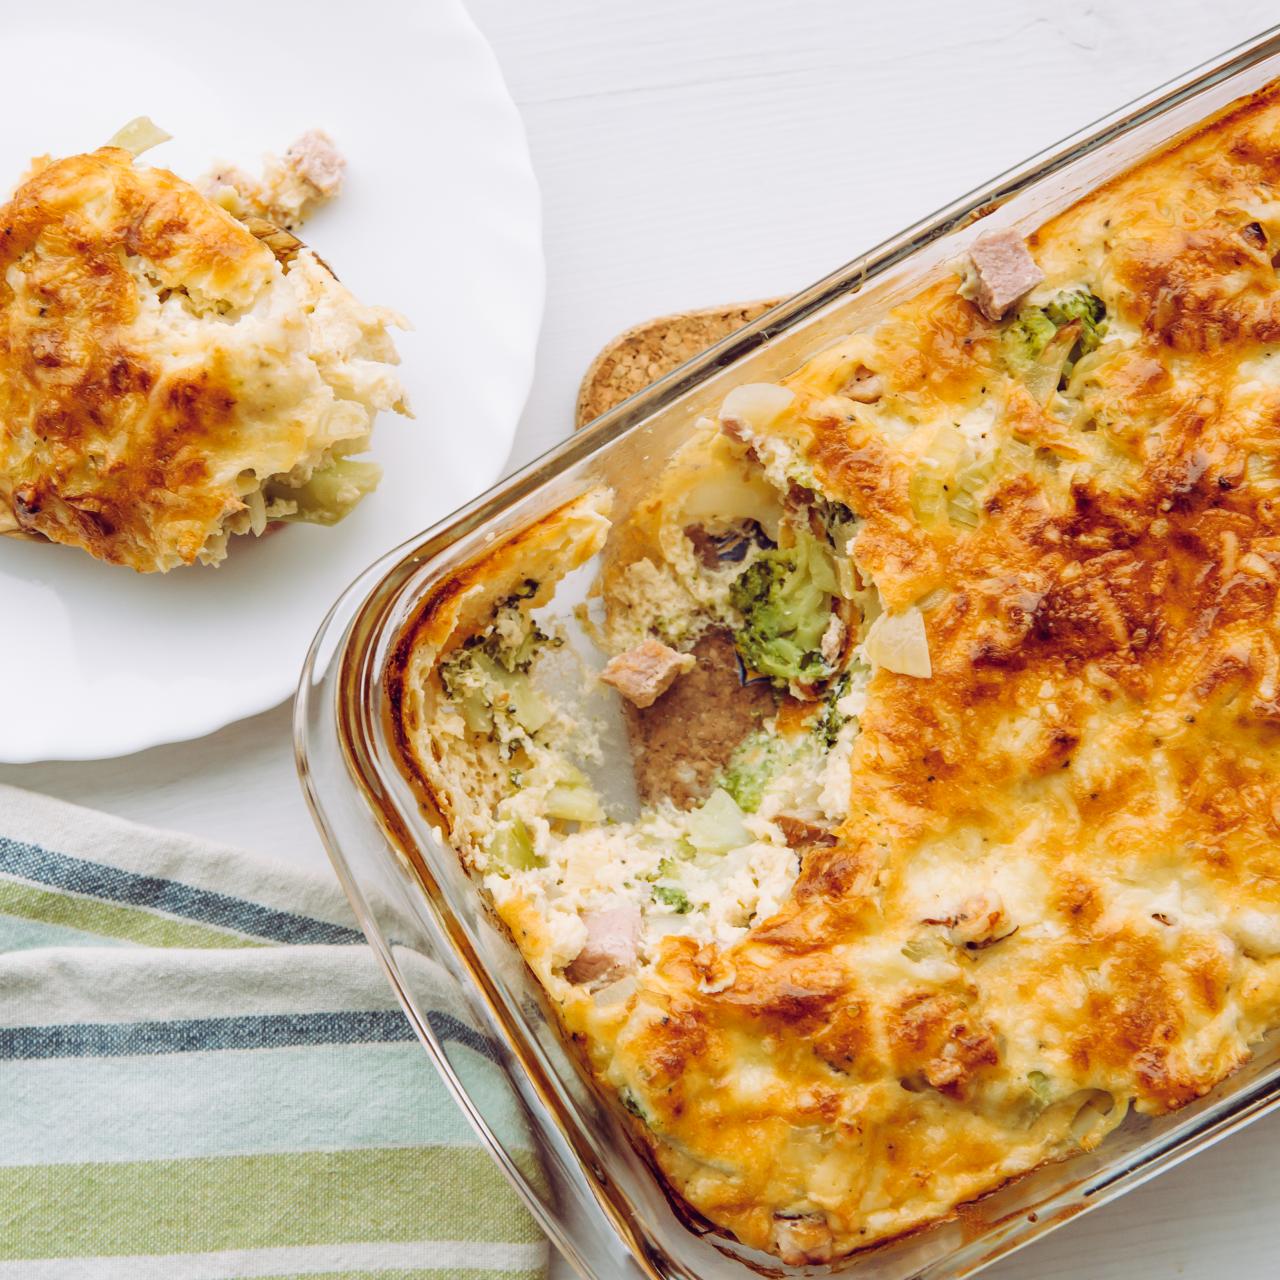 What is a Casserole and What Does it Contain?